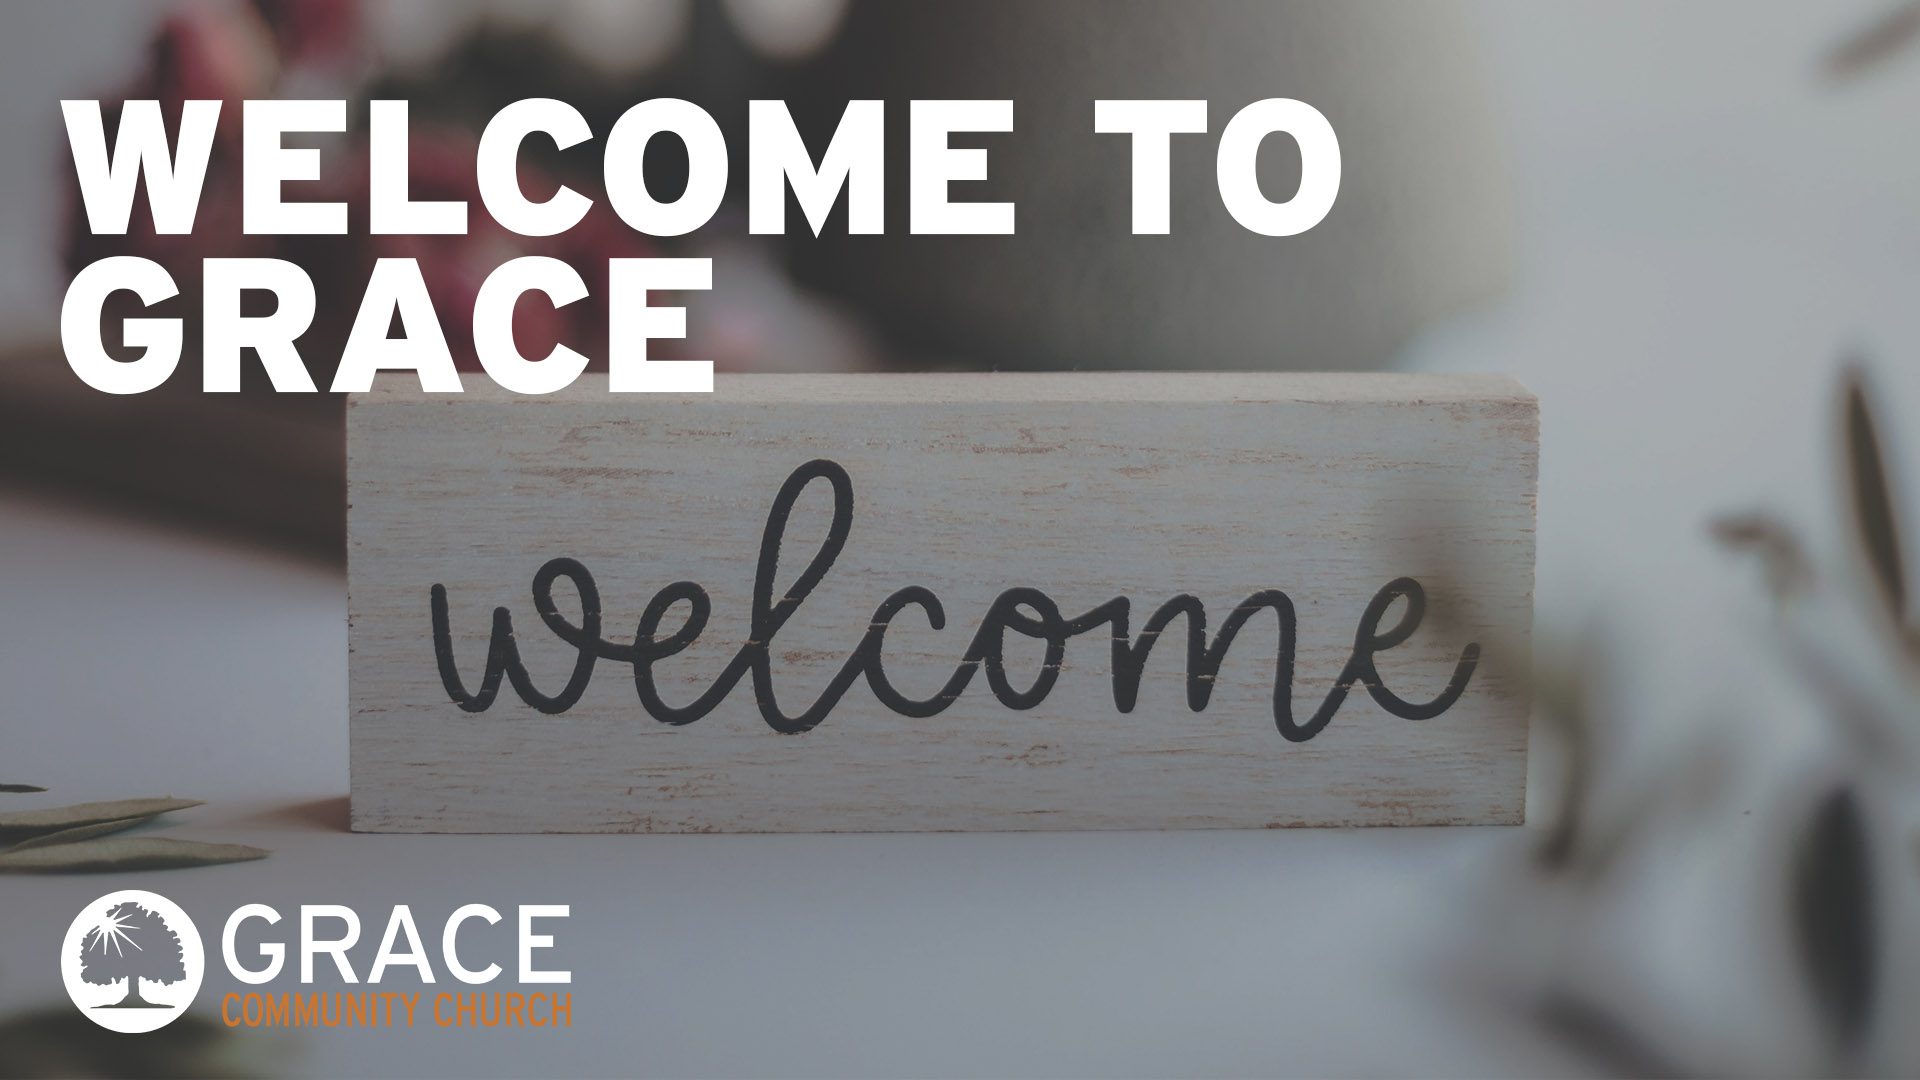 Welcome to Grace - Grace community church